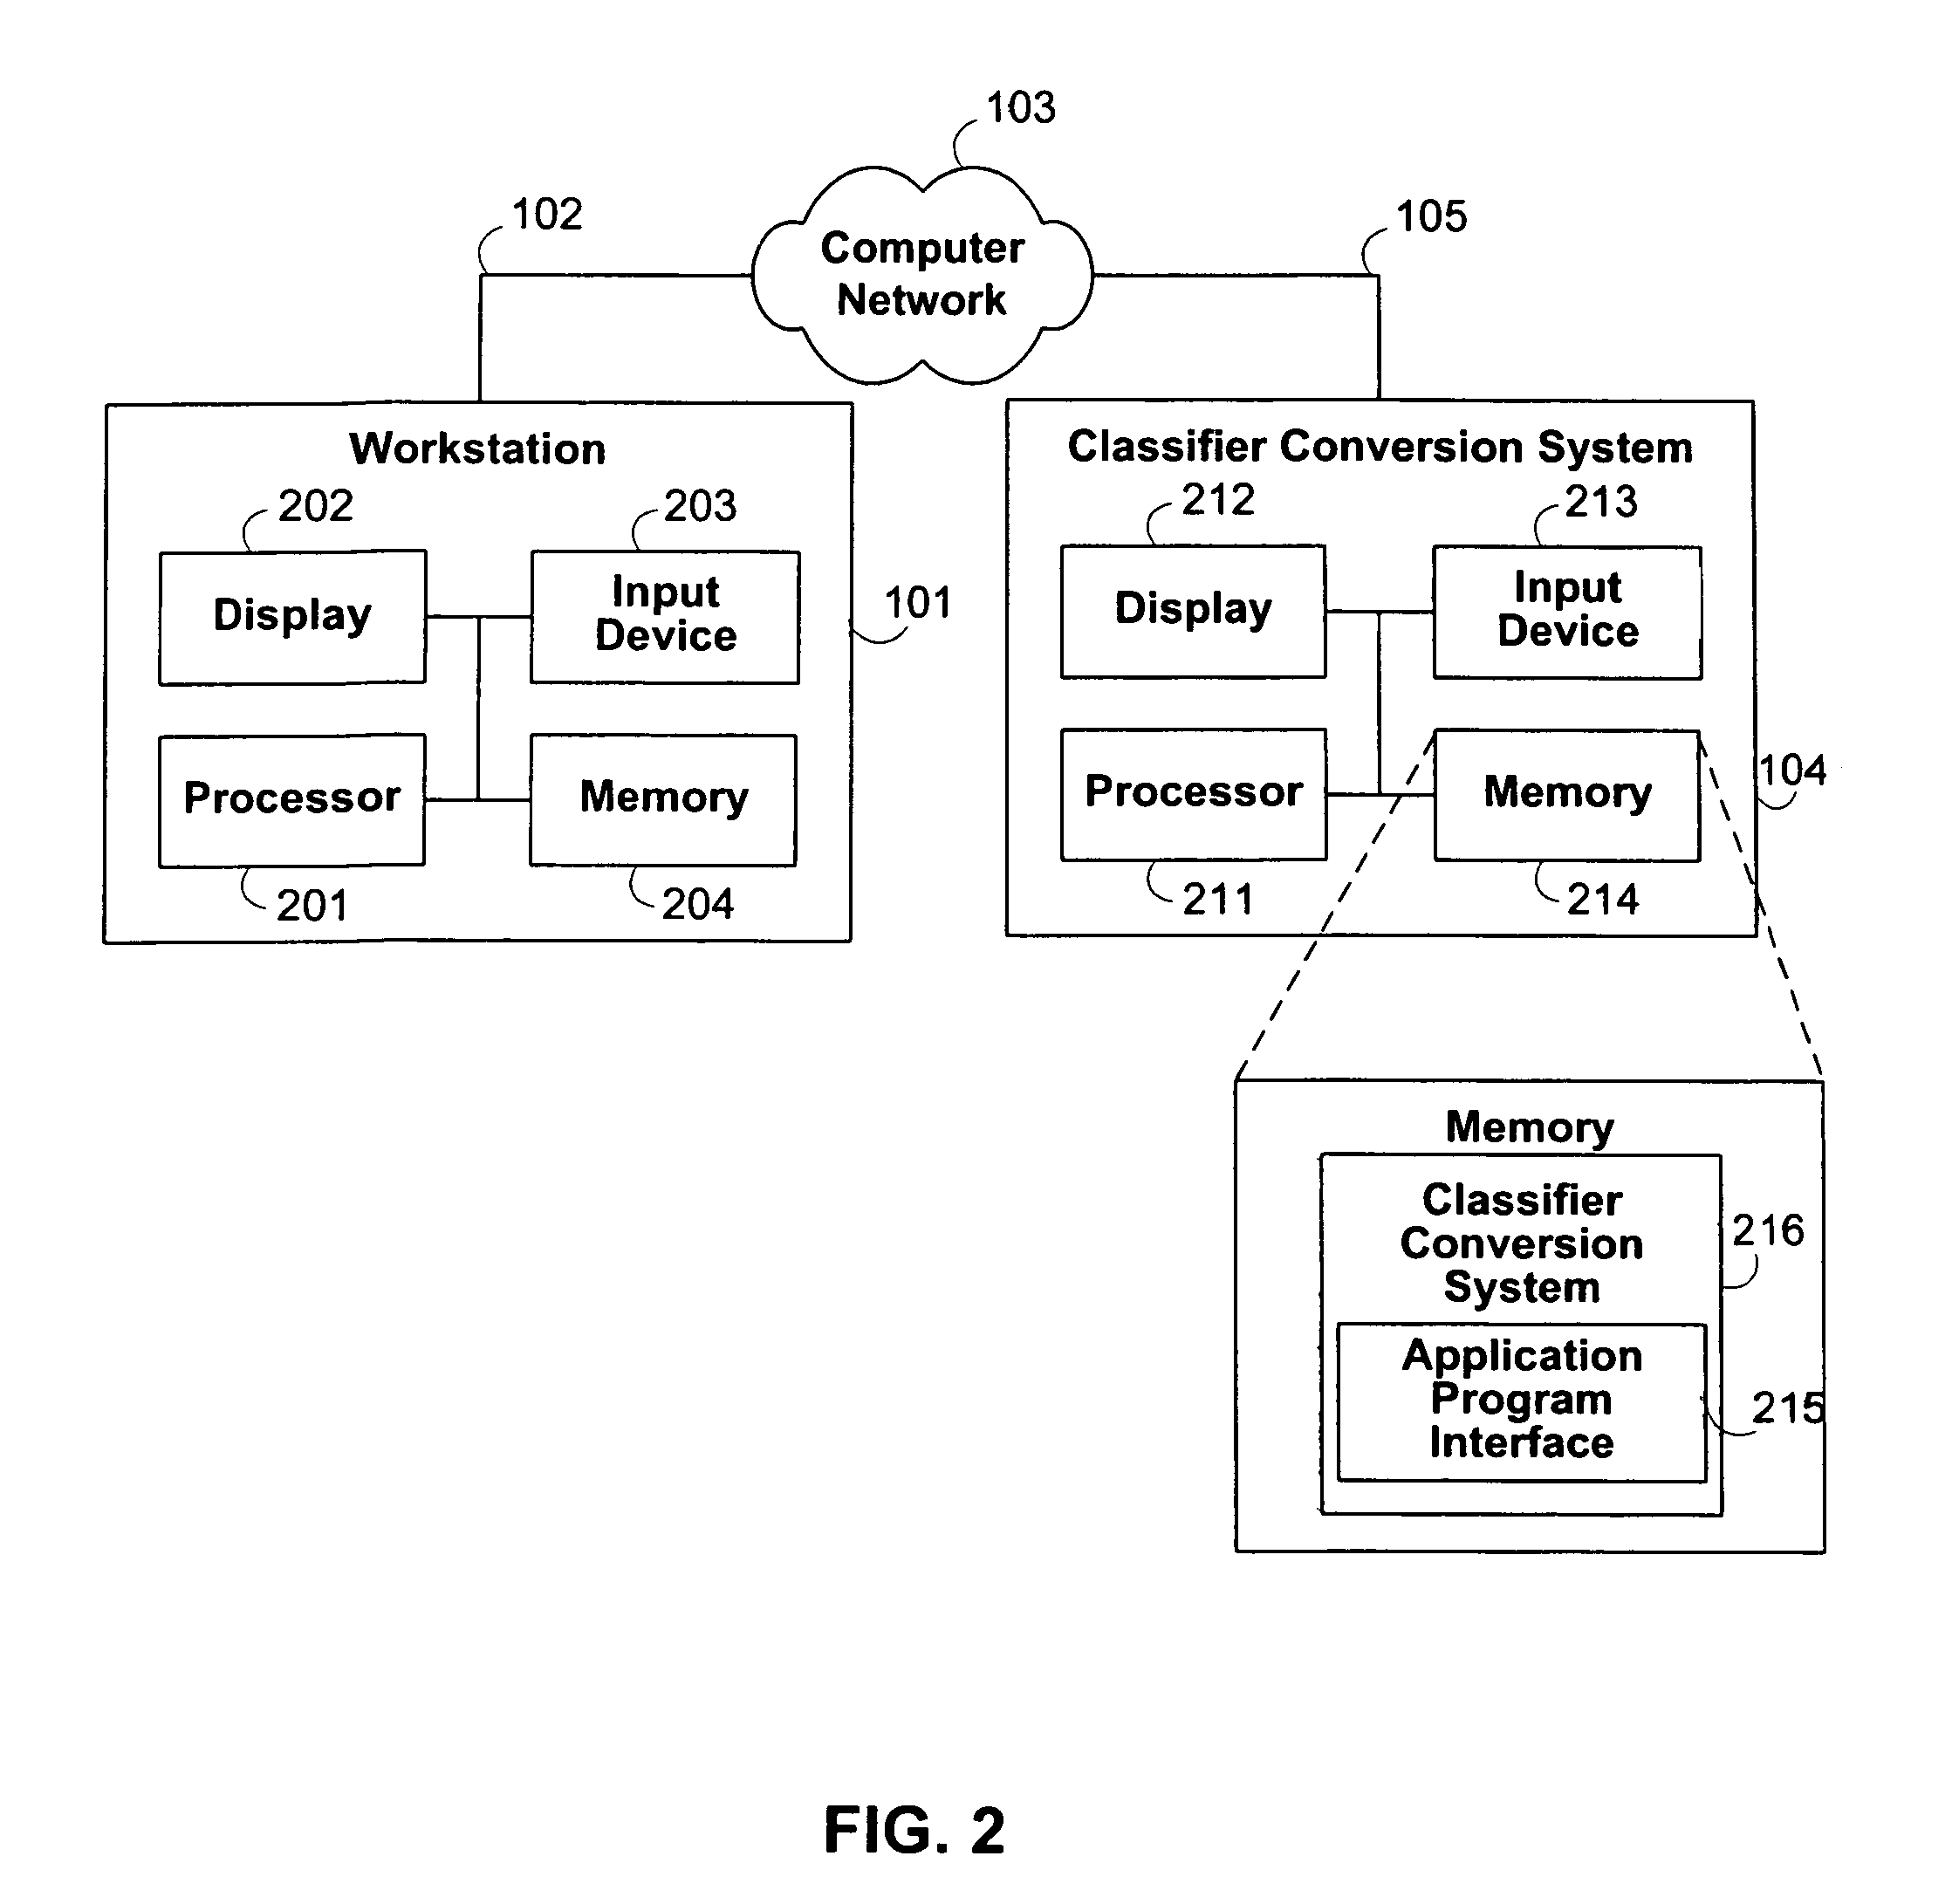 Systems and methods for using automated translation and other statistical methods to convert a classifier in one language to another language